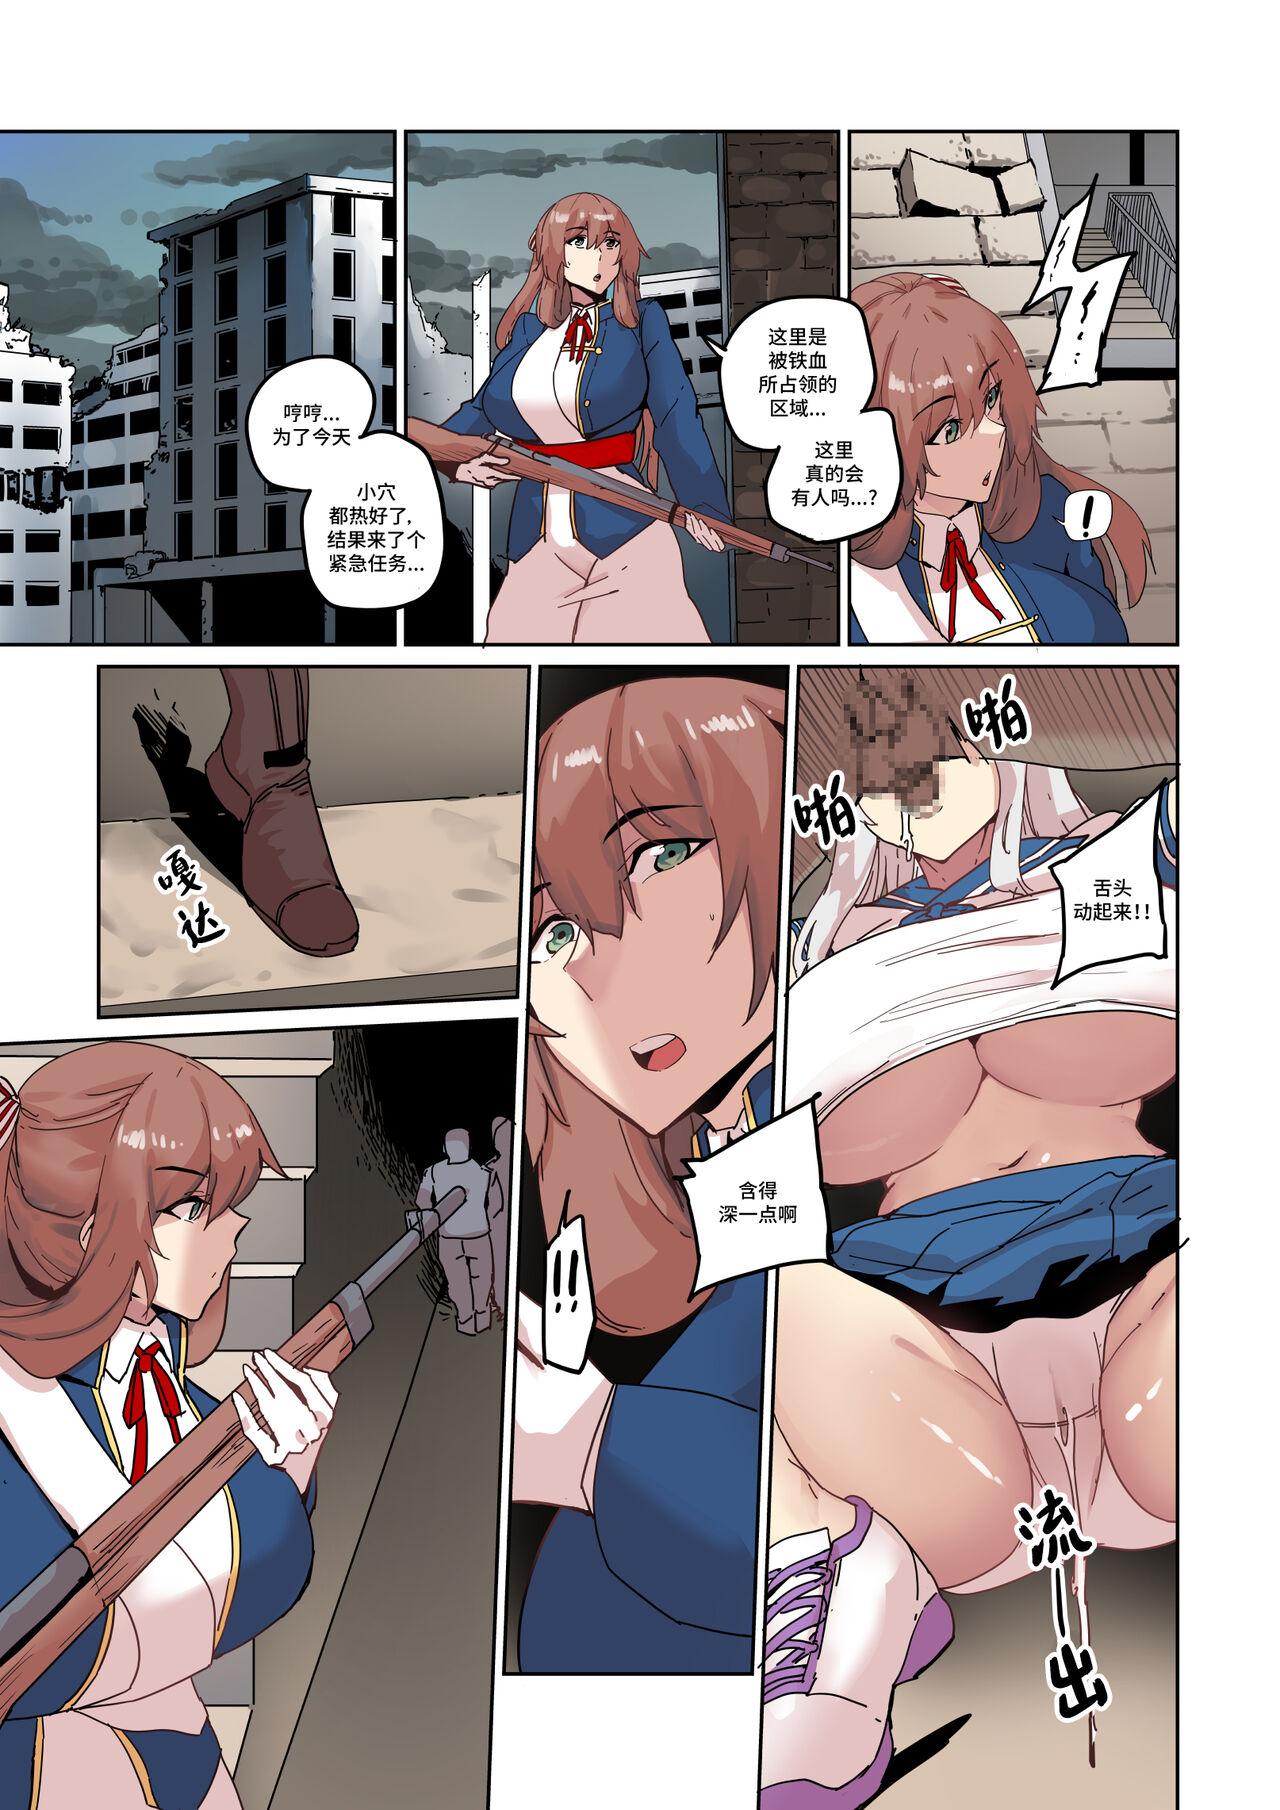 Sex Toy Griffin Sponsor 3 - Girls frontline Gay Natural - Page 8